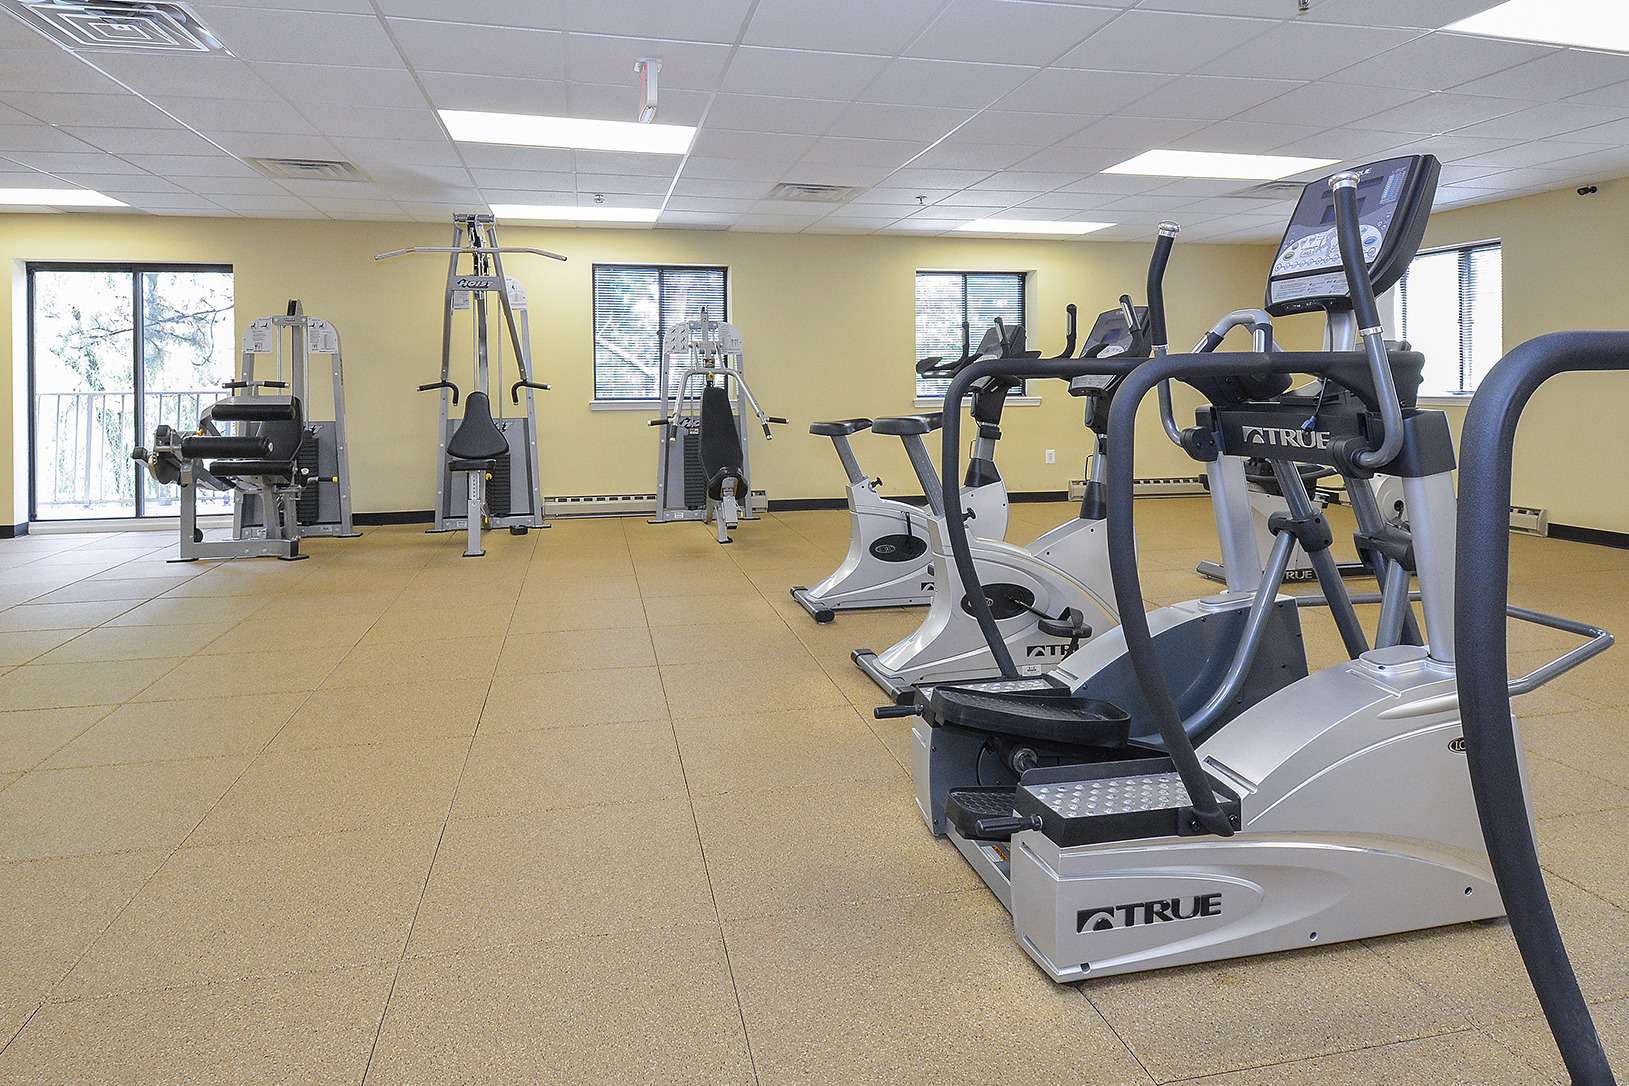 The large fitness center with windows and a balcony at Valley Forge Suites